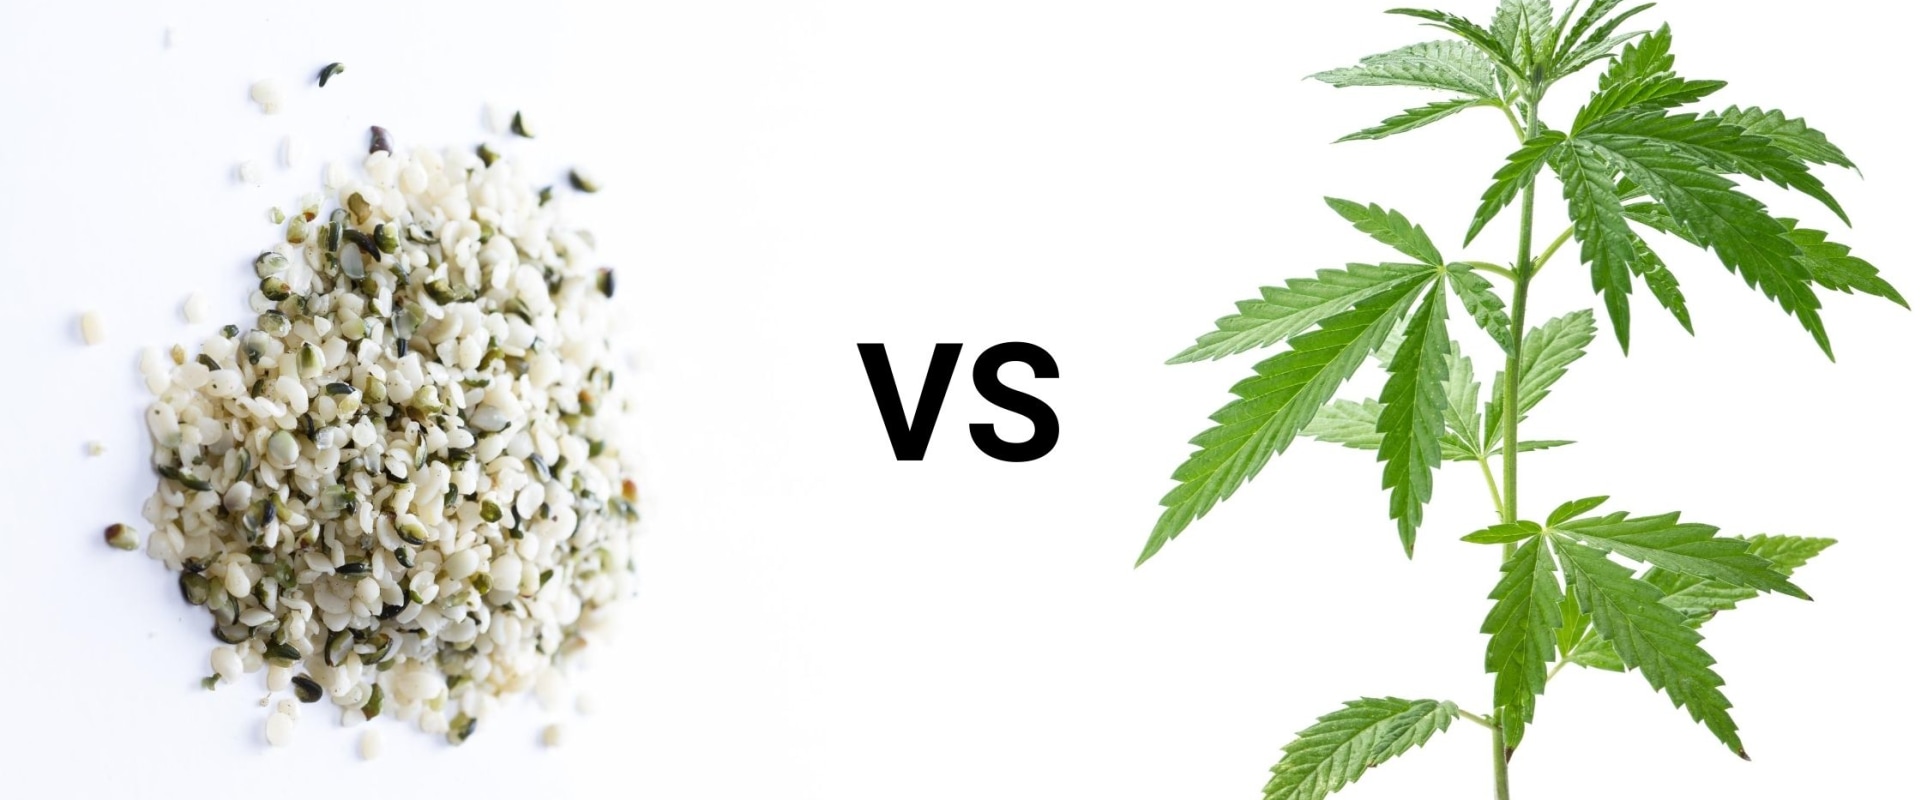 What is the difference between cbd and hemp extract?